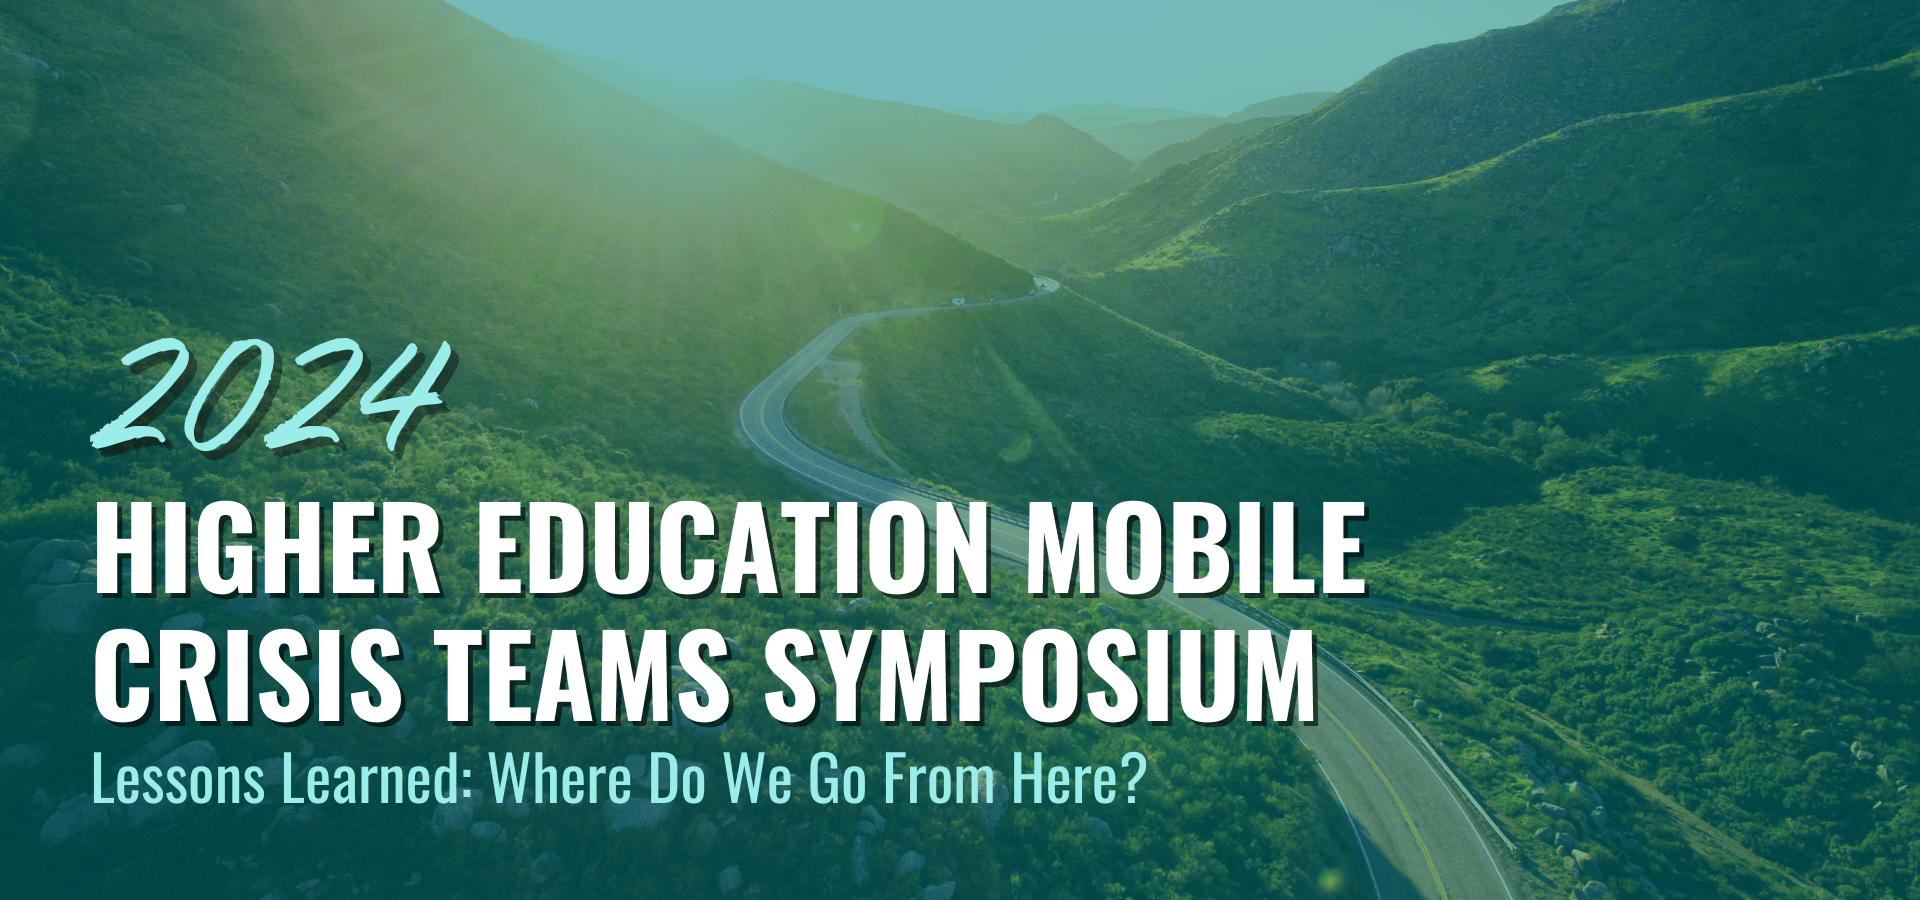 2024 Higher Education Mobile Crisis Teams Symposium; Lessons Learned: Where do we go from here?